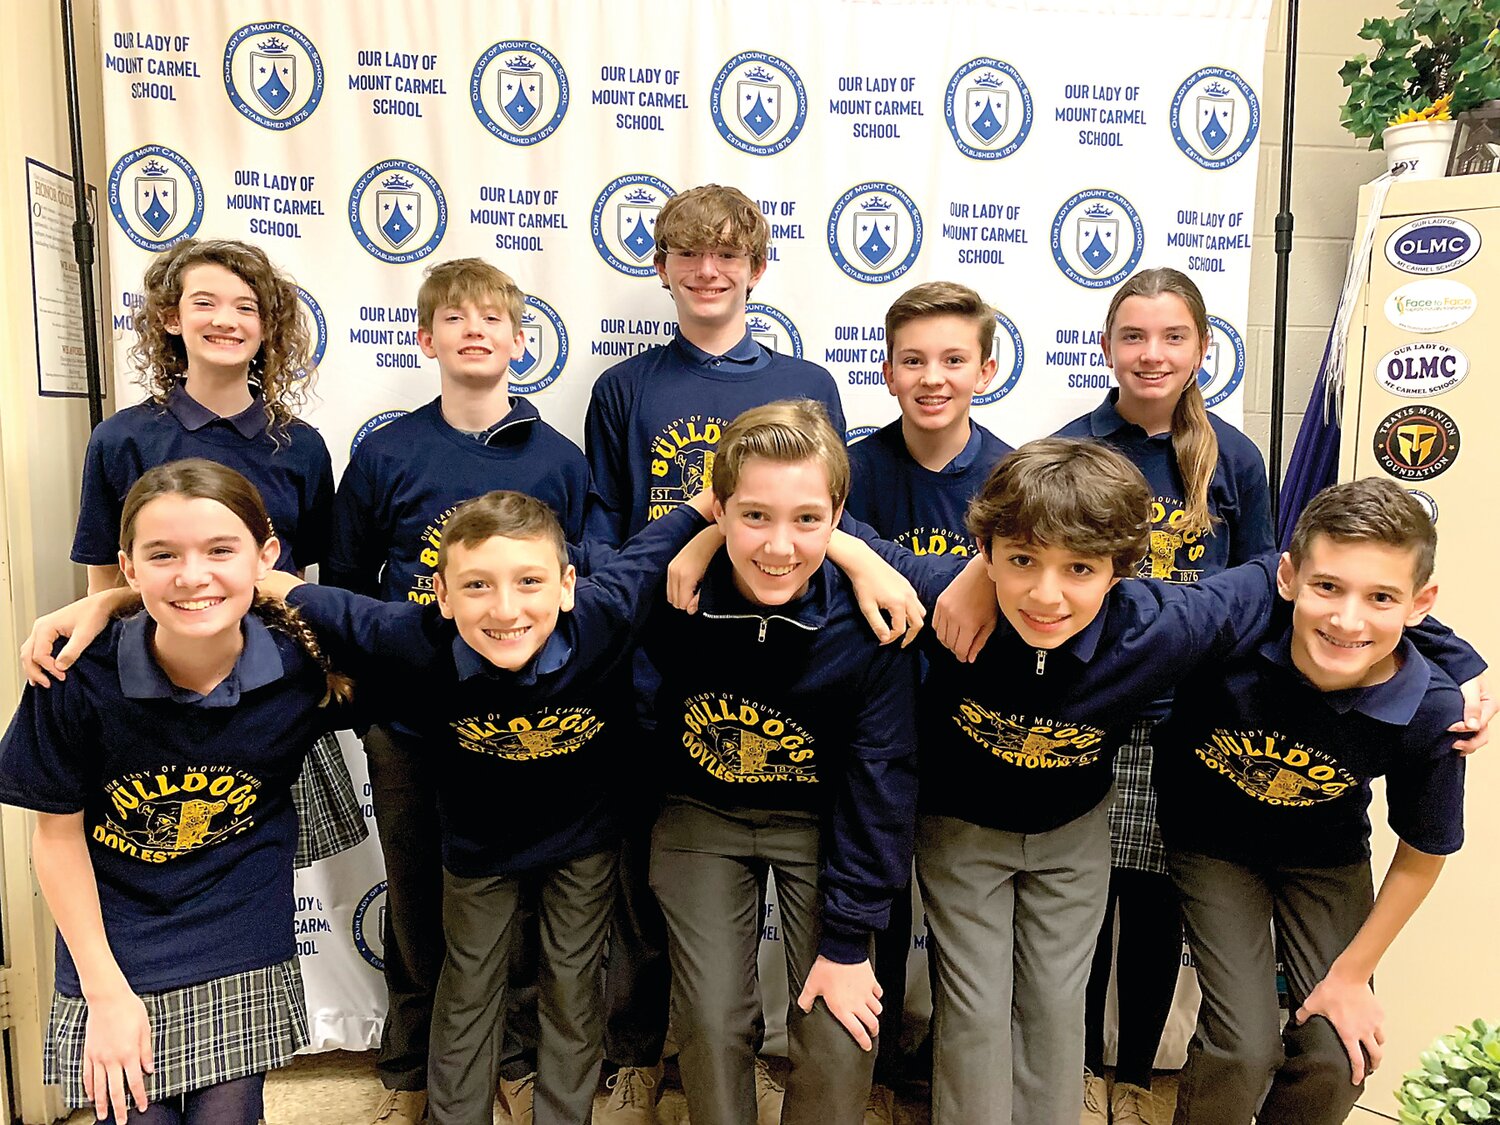 The Bionic Bulldogs from Our Lady of Mount Carmel School.